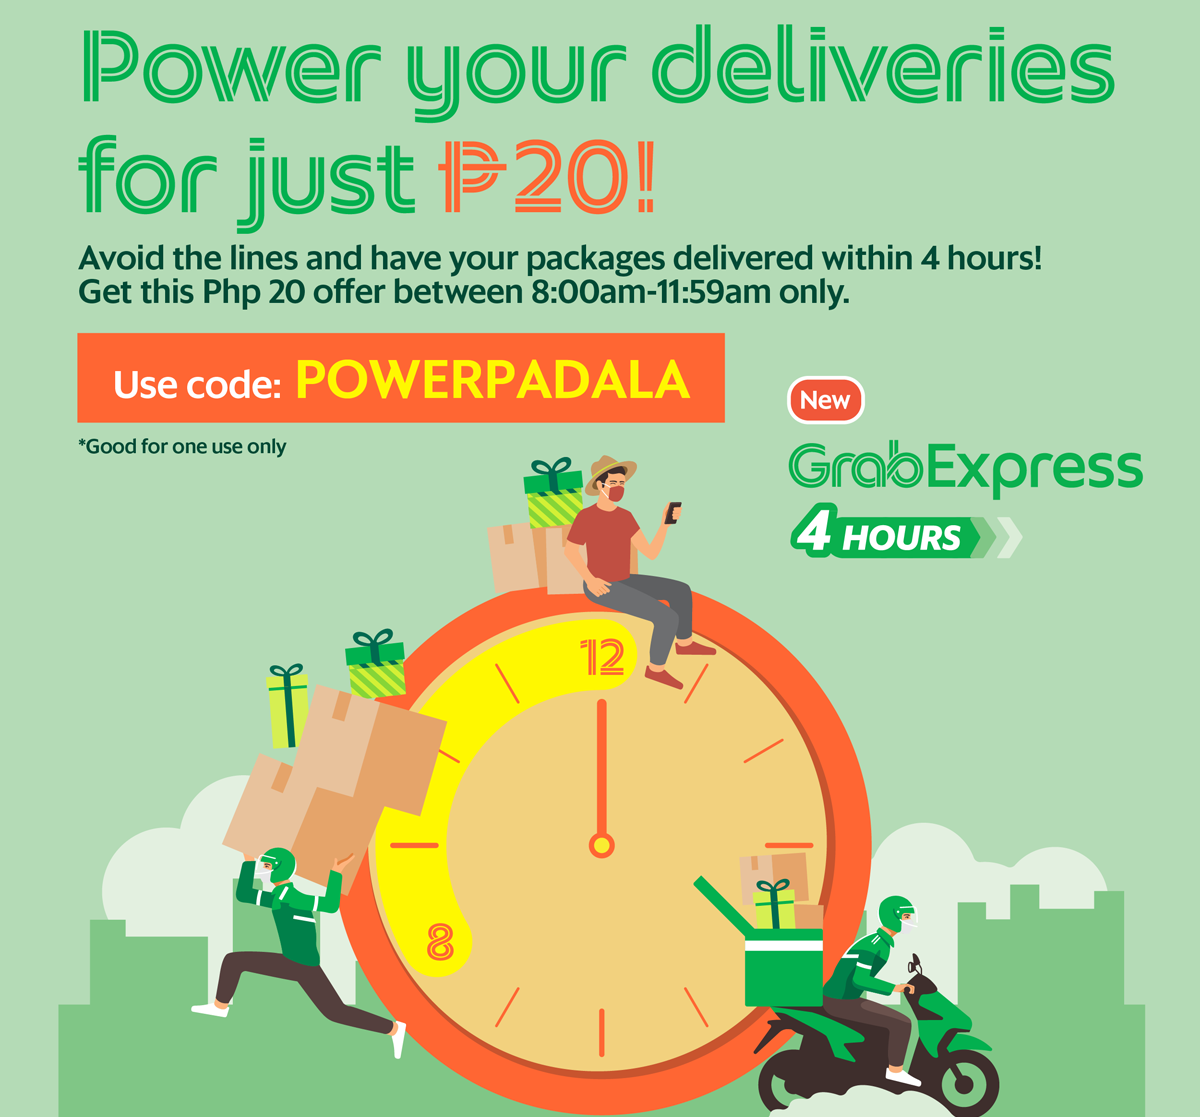 GrabExpress Padala 4 Hour Promo lets you deliver your goods for just P20!